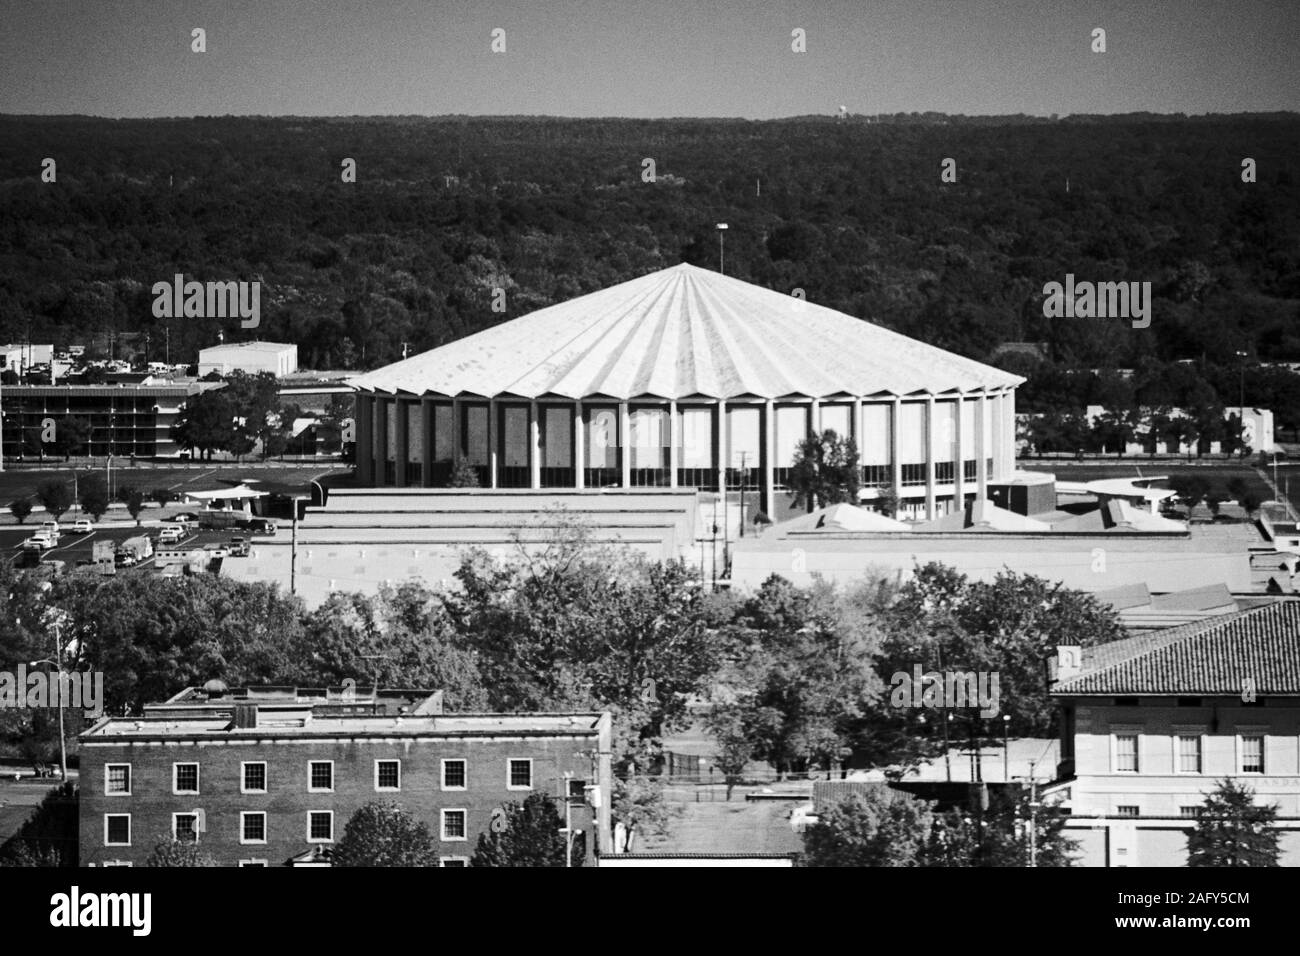 Jackson, Mississippi, USA - 1996:  Archival black and white view of the landmark, Mississippi Coliseum arena at the state fairgrounds in Jackson. Stock Photo